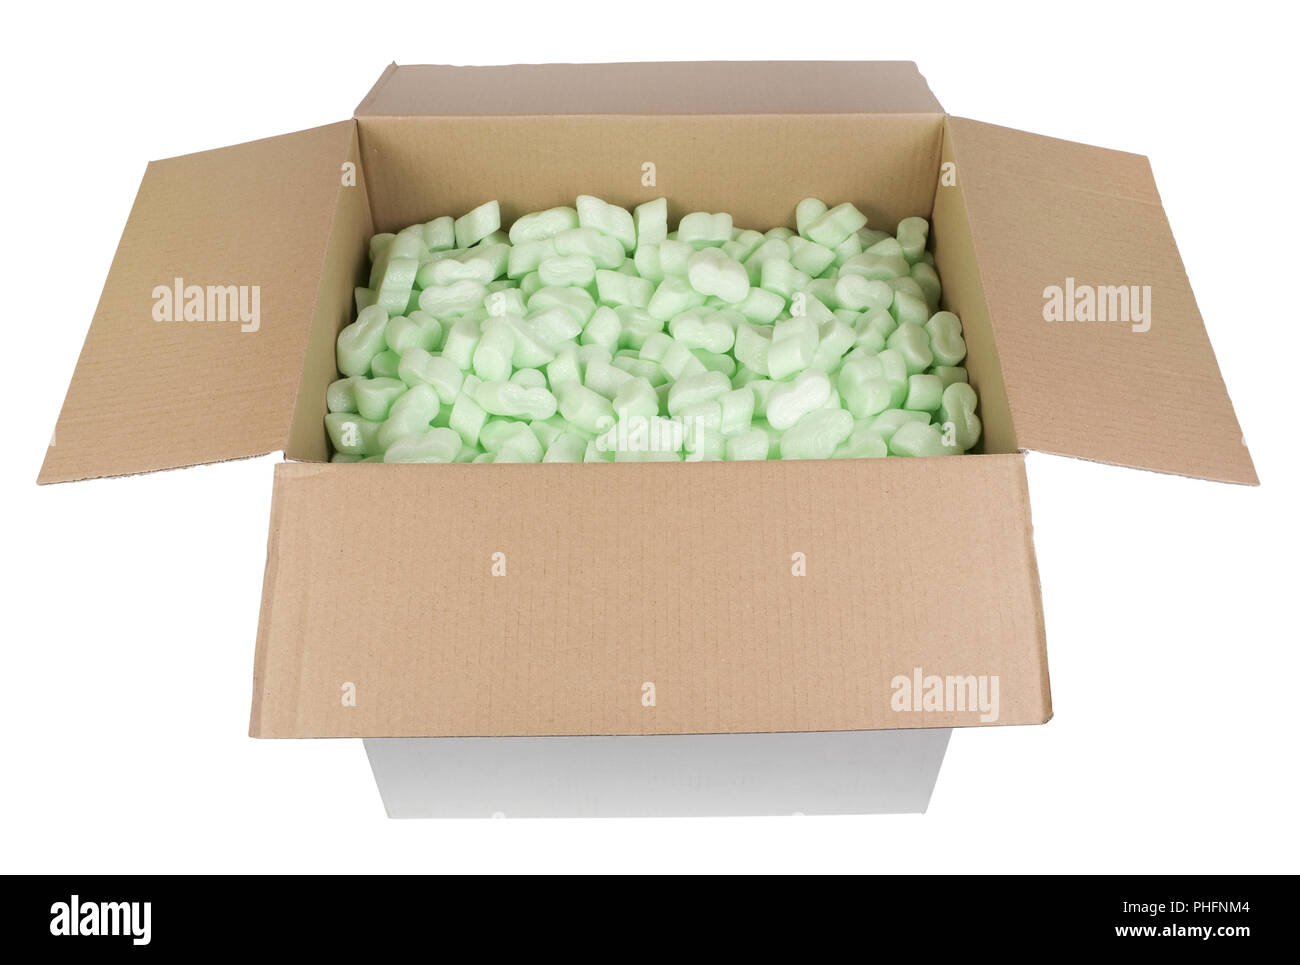 Cardboard box witch plastic protective granules Stock Photo